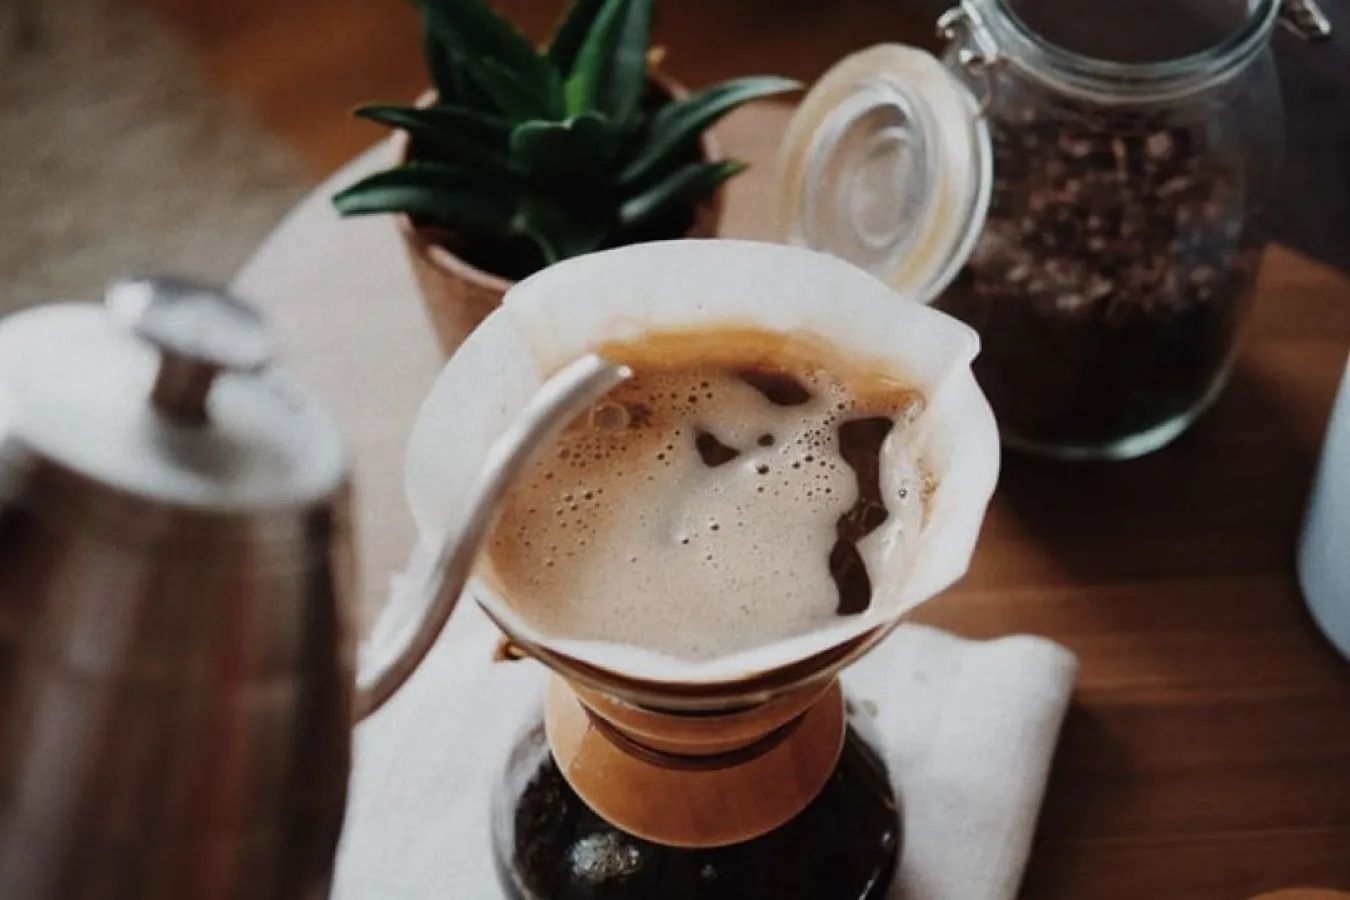 https://www.helenacoffee.vn/wp-content/uploads/2022/06/Why-Should-Coffee-Brewing-Not-Take-100-Degrees-Boiling-Water-2.webp